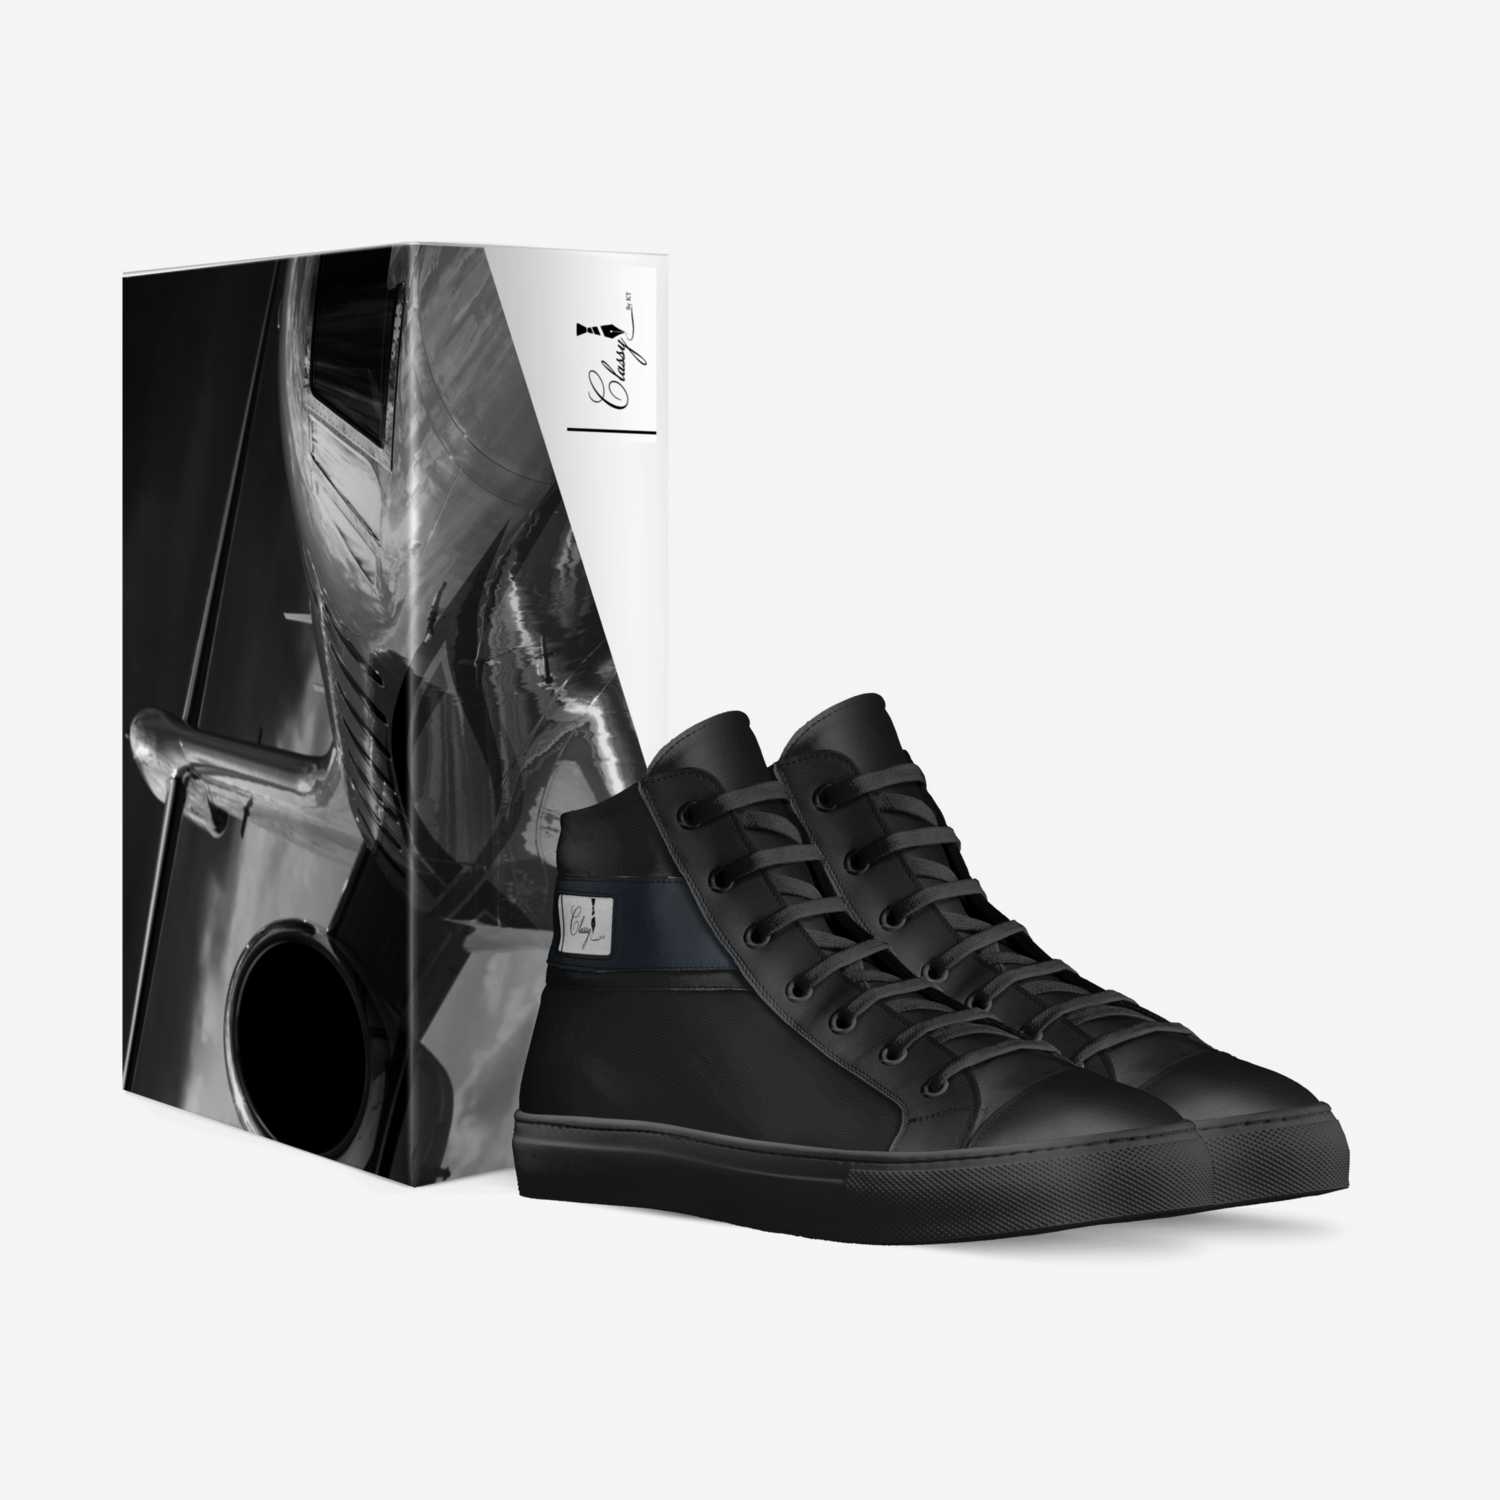 R1 Fierce custom made in Italy shoes by Roberto Rodriguez | Box view